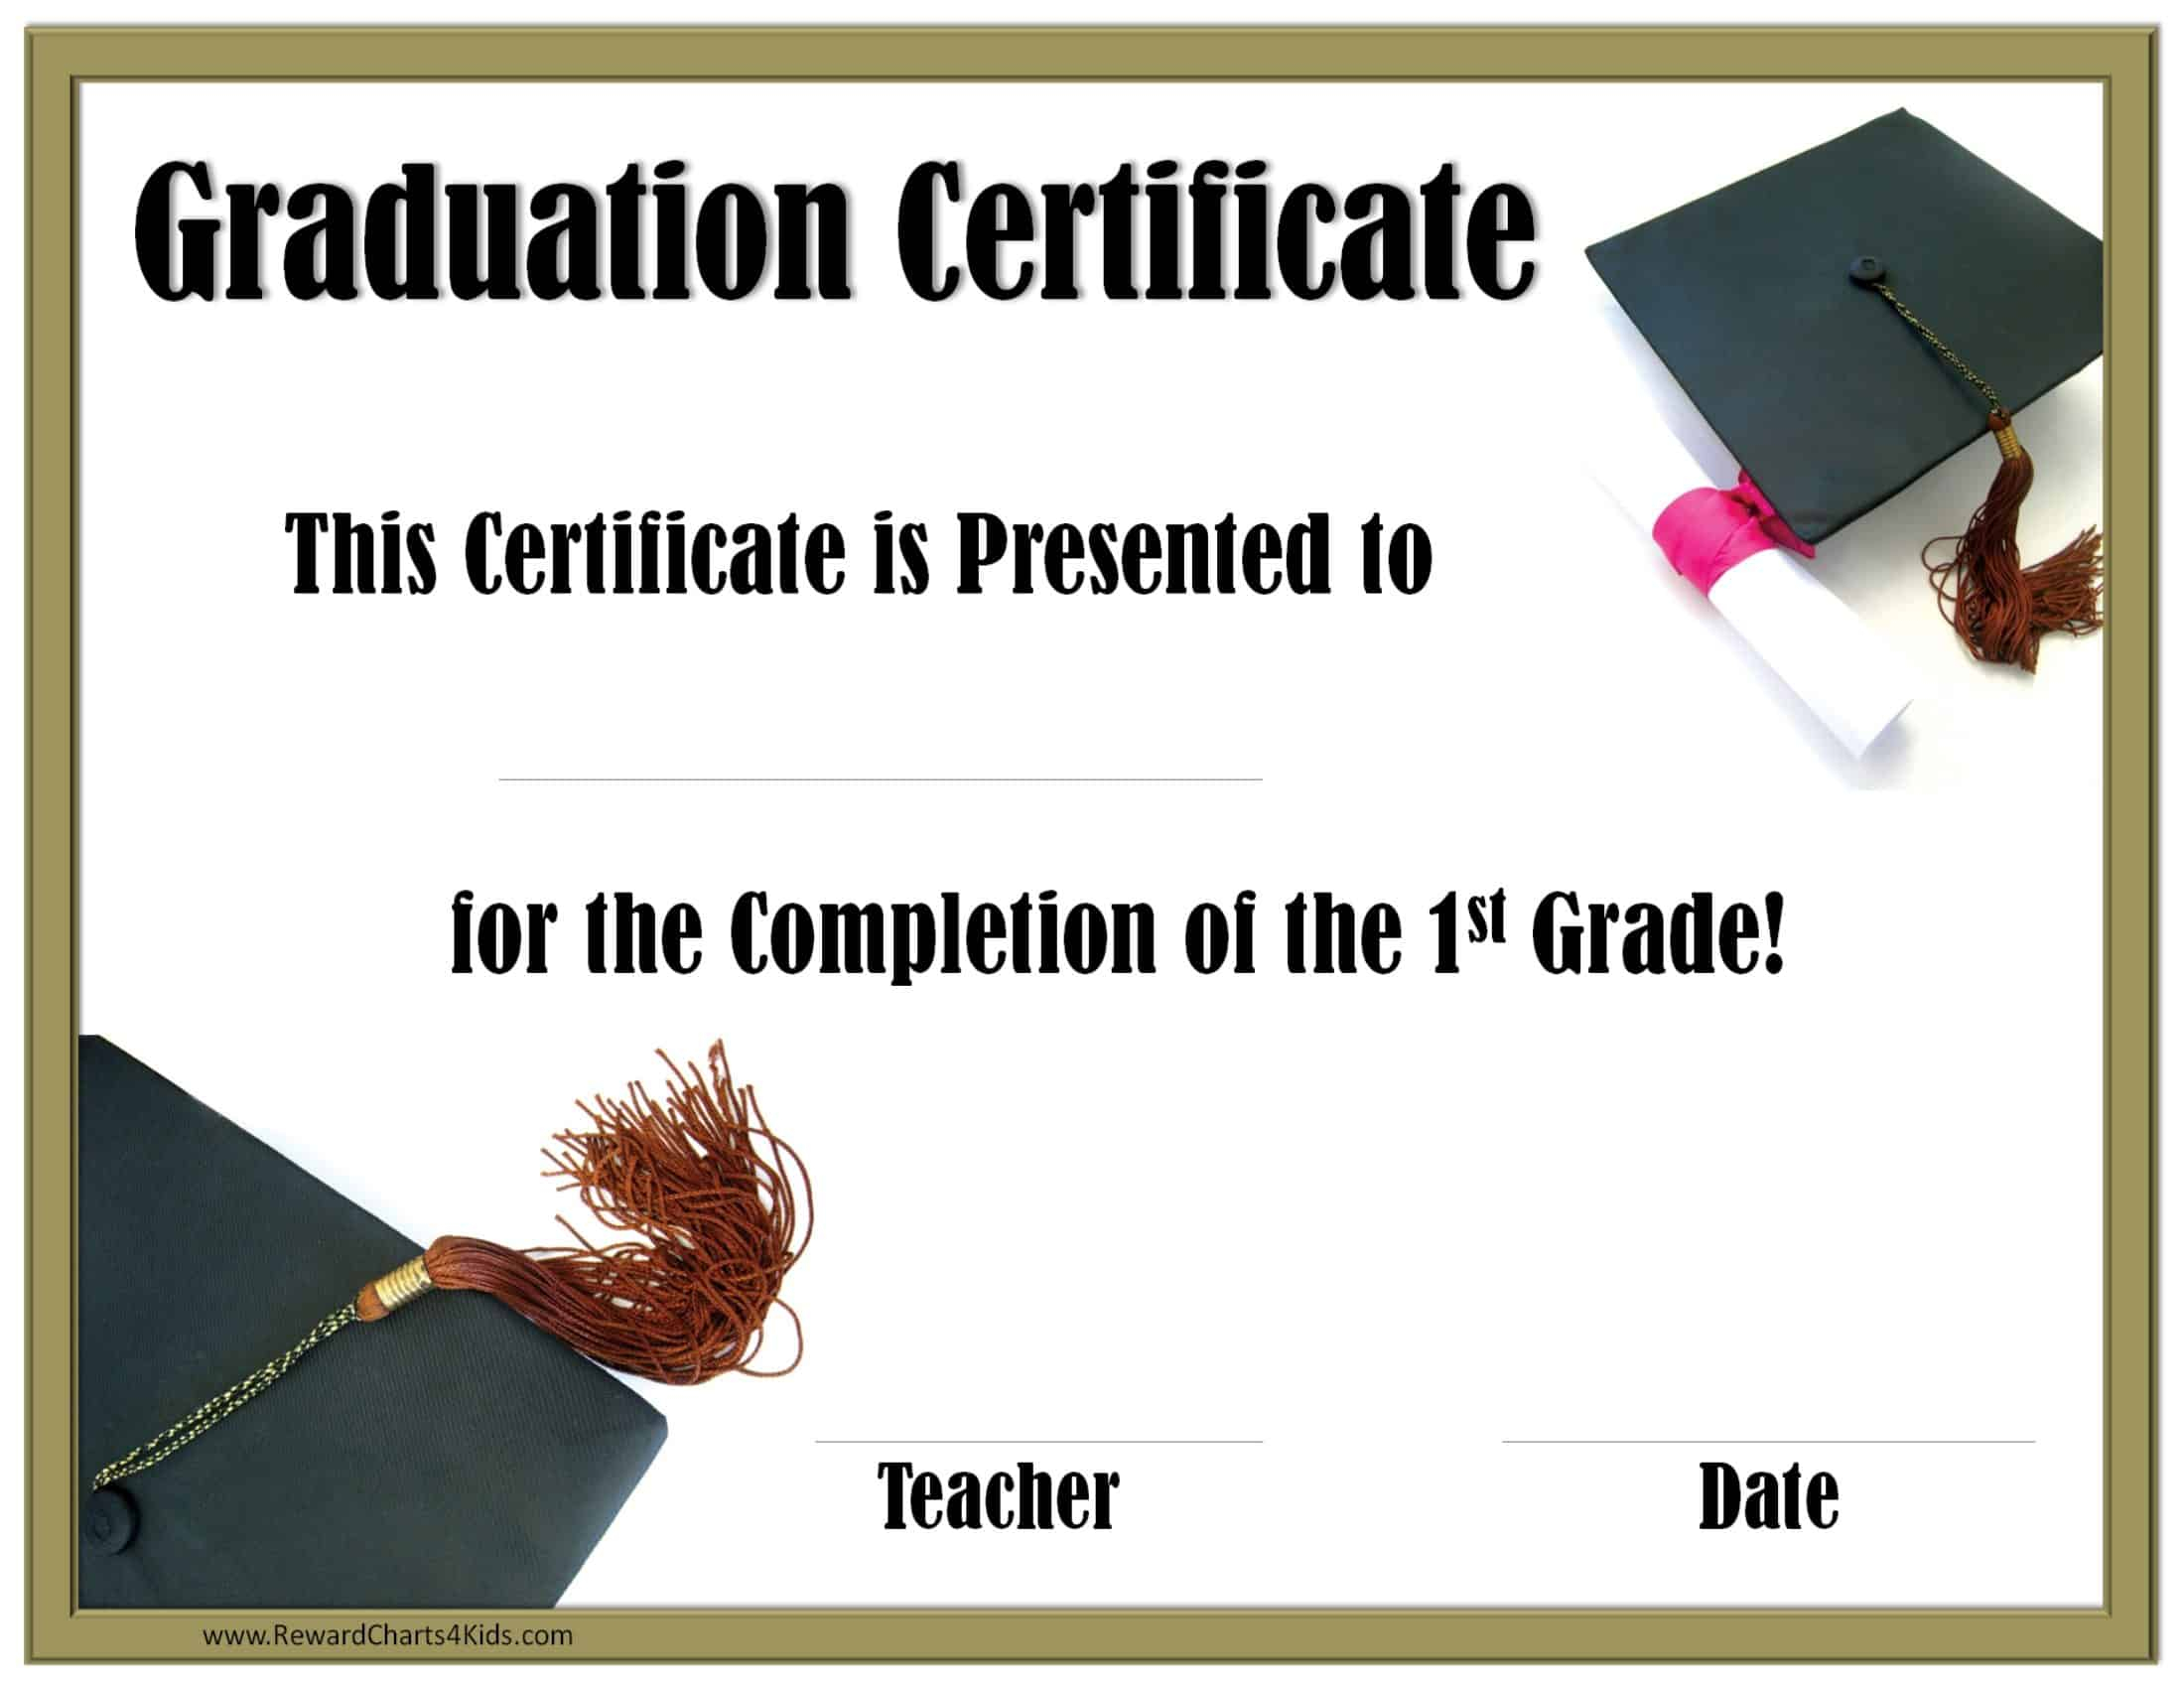 School Graduation Certificates  Customize Online With Or Without  With Regard To Free Printable Graduation Certificate Templates